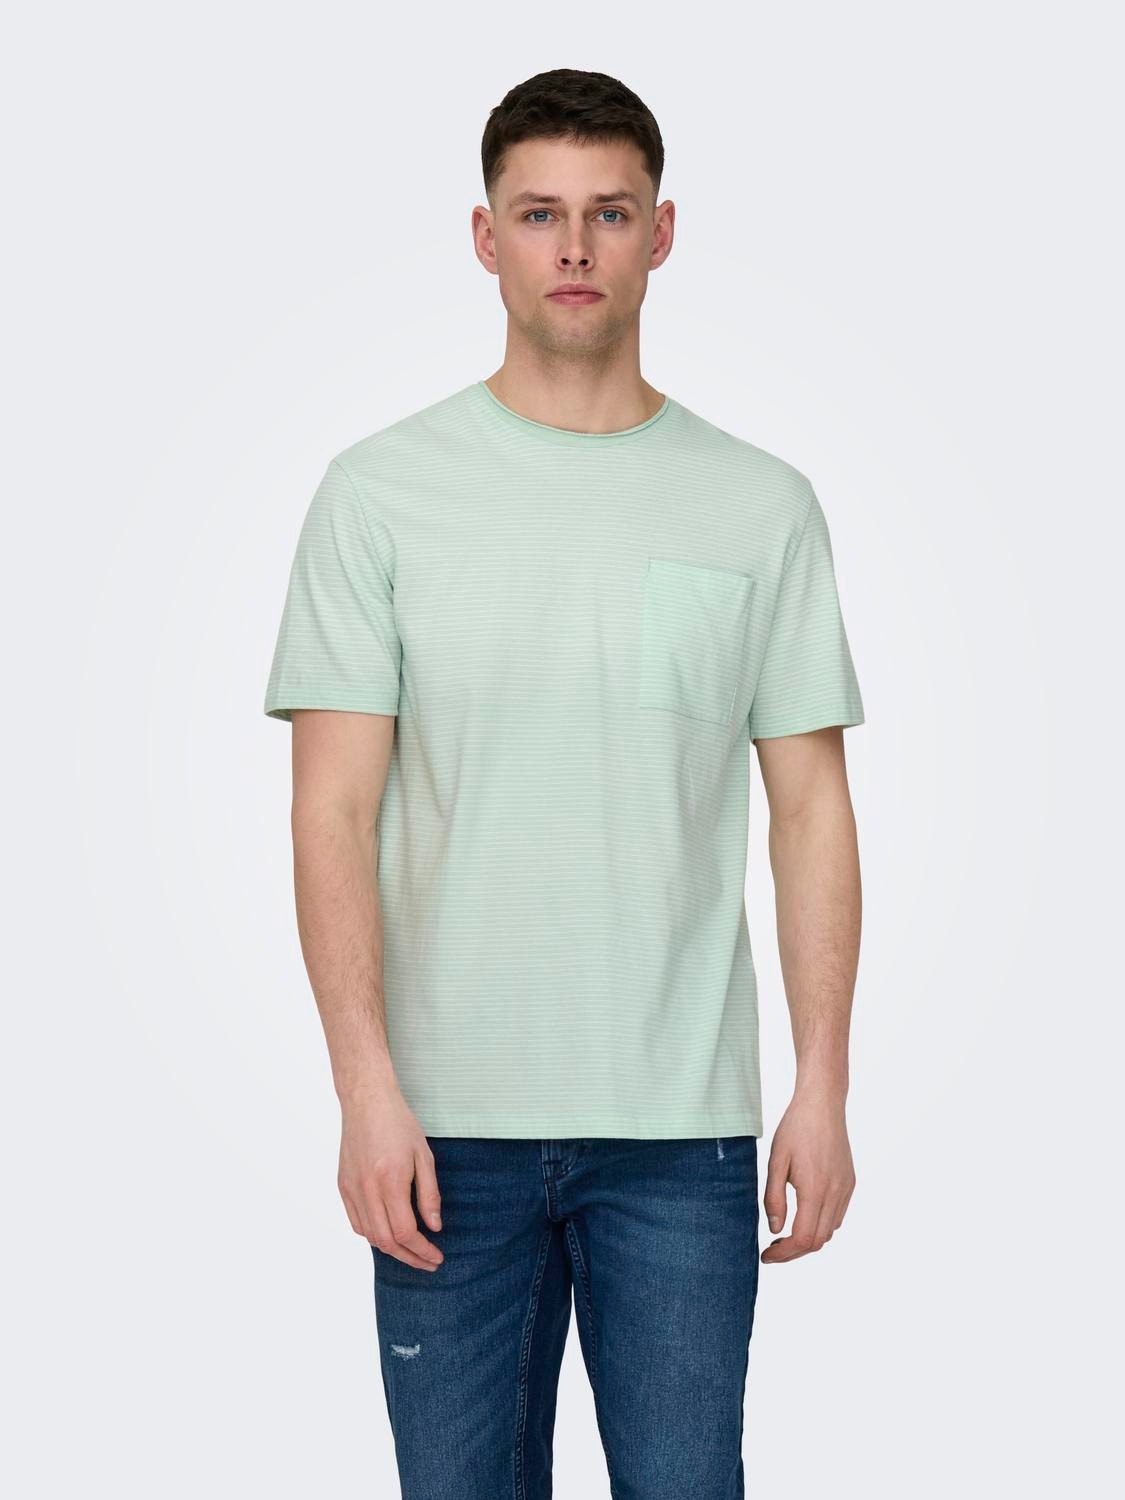 ONLY & SONS Striped o-neck t-shirt with chest pocket -Surf Spray - 22025680